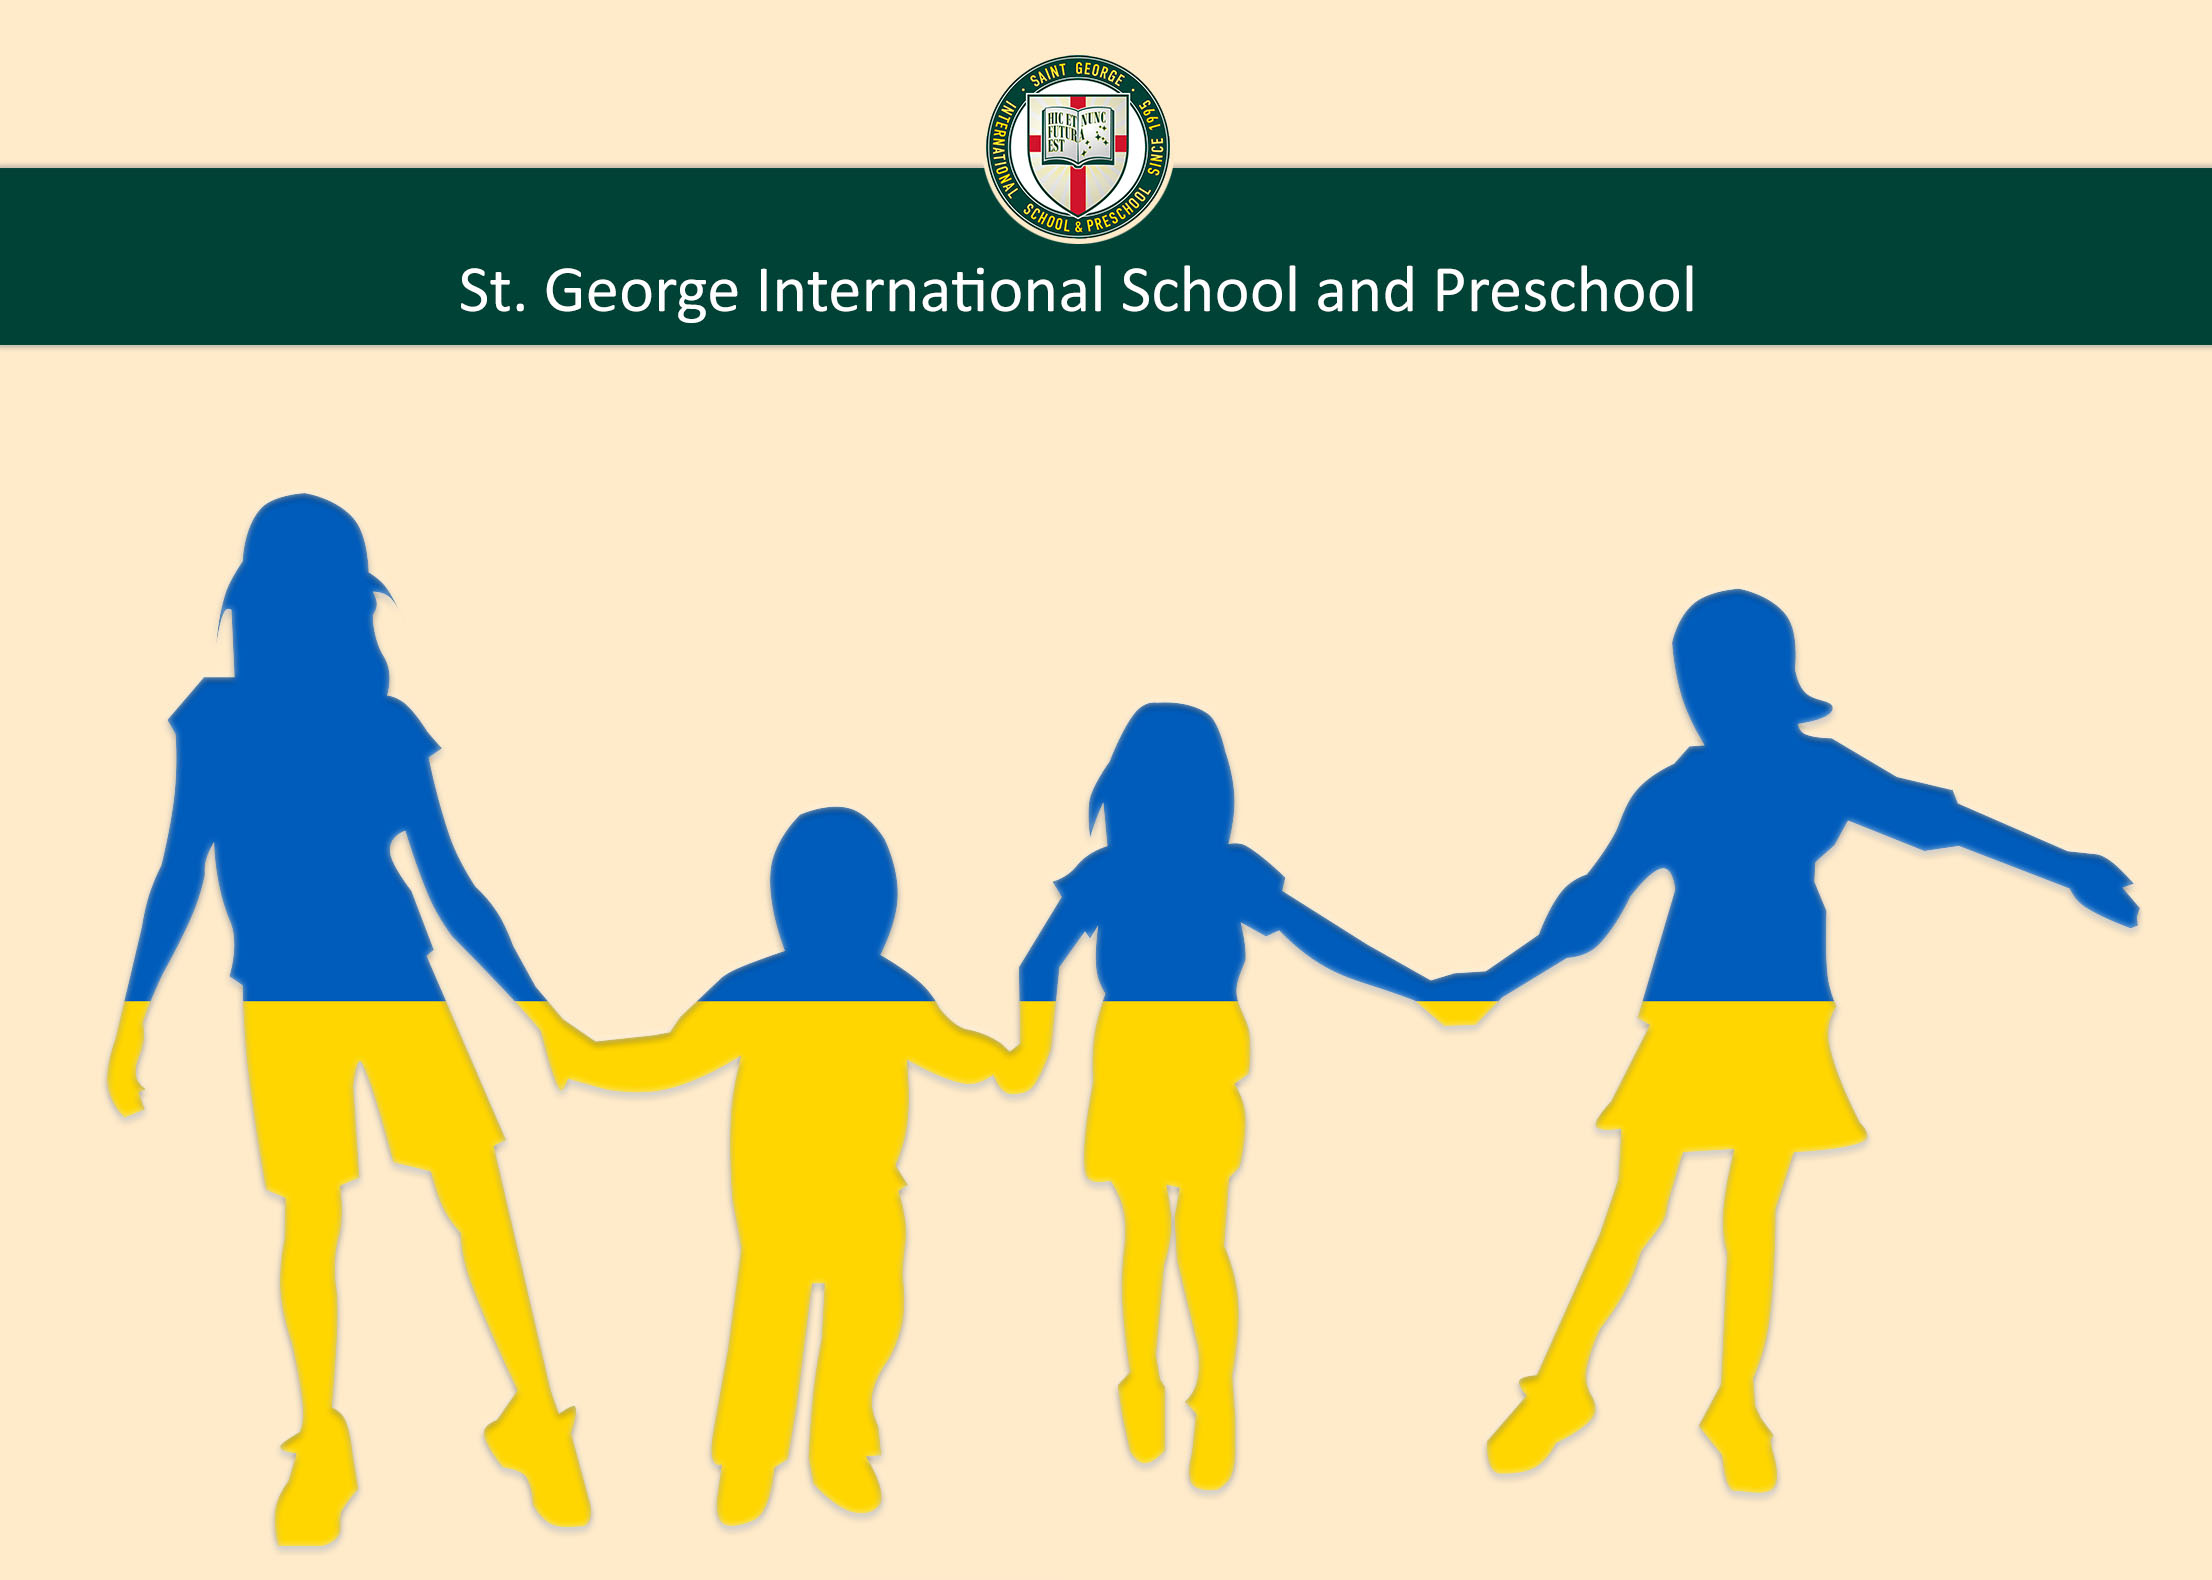 St. George International School and Preschool welcomes children and students refugees from Ukraine